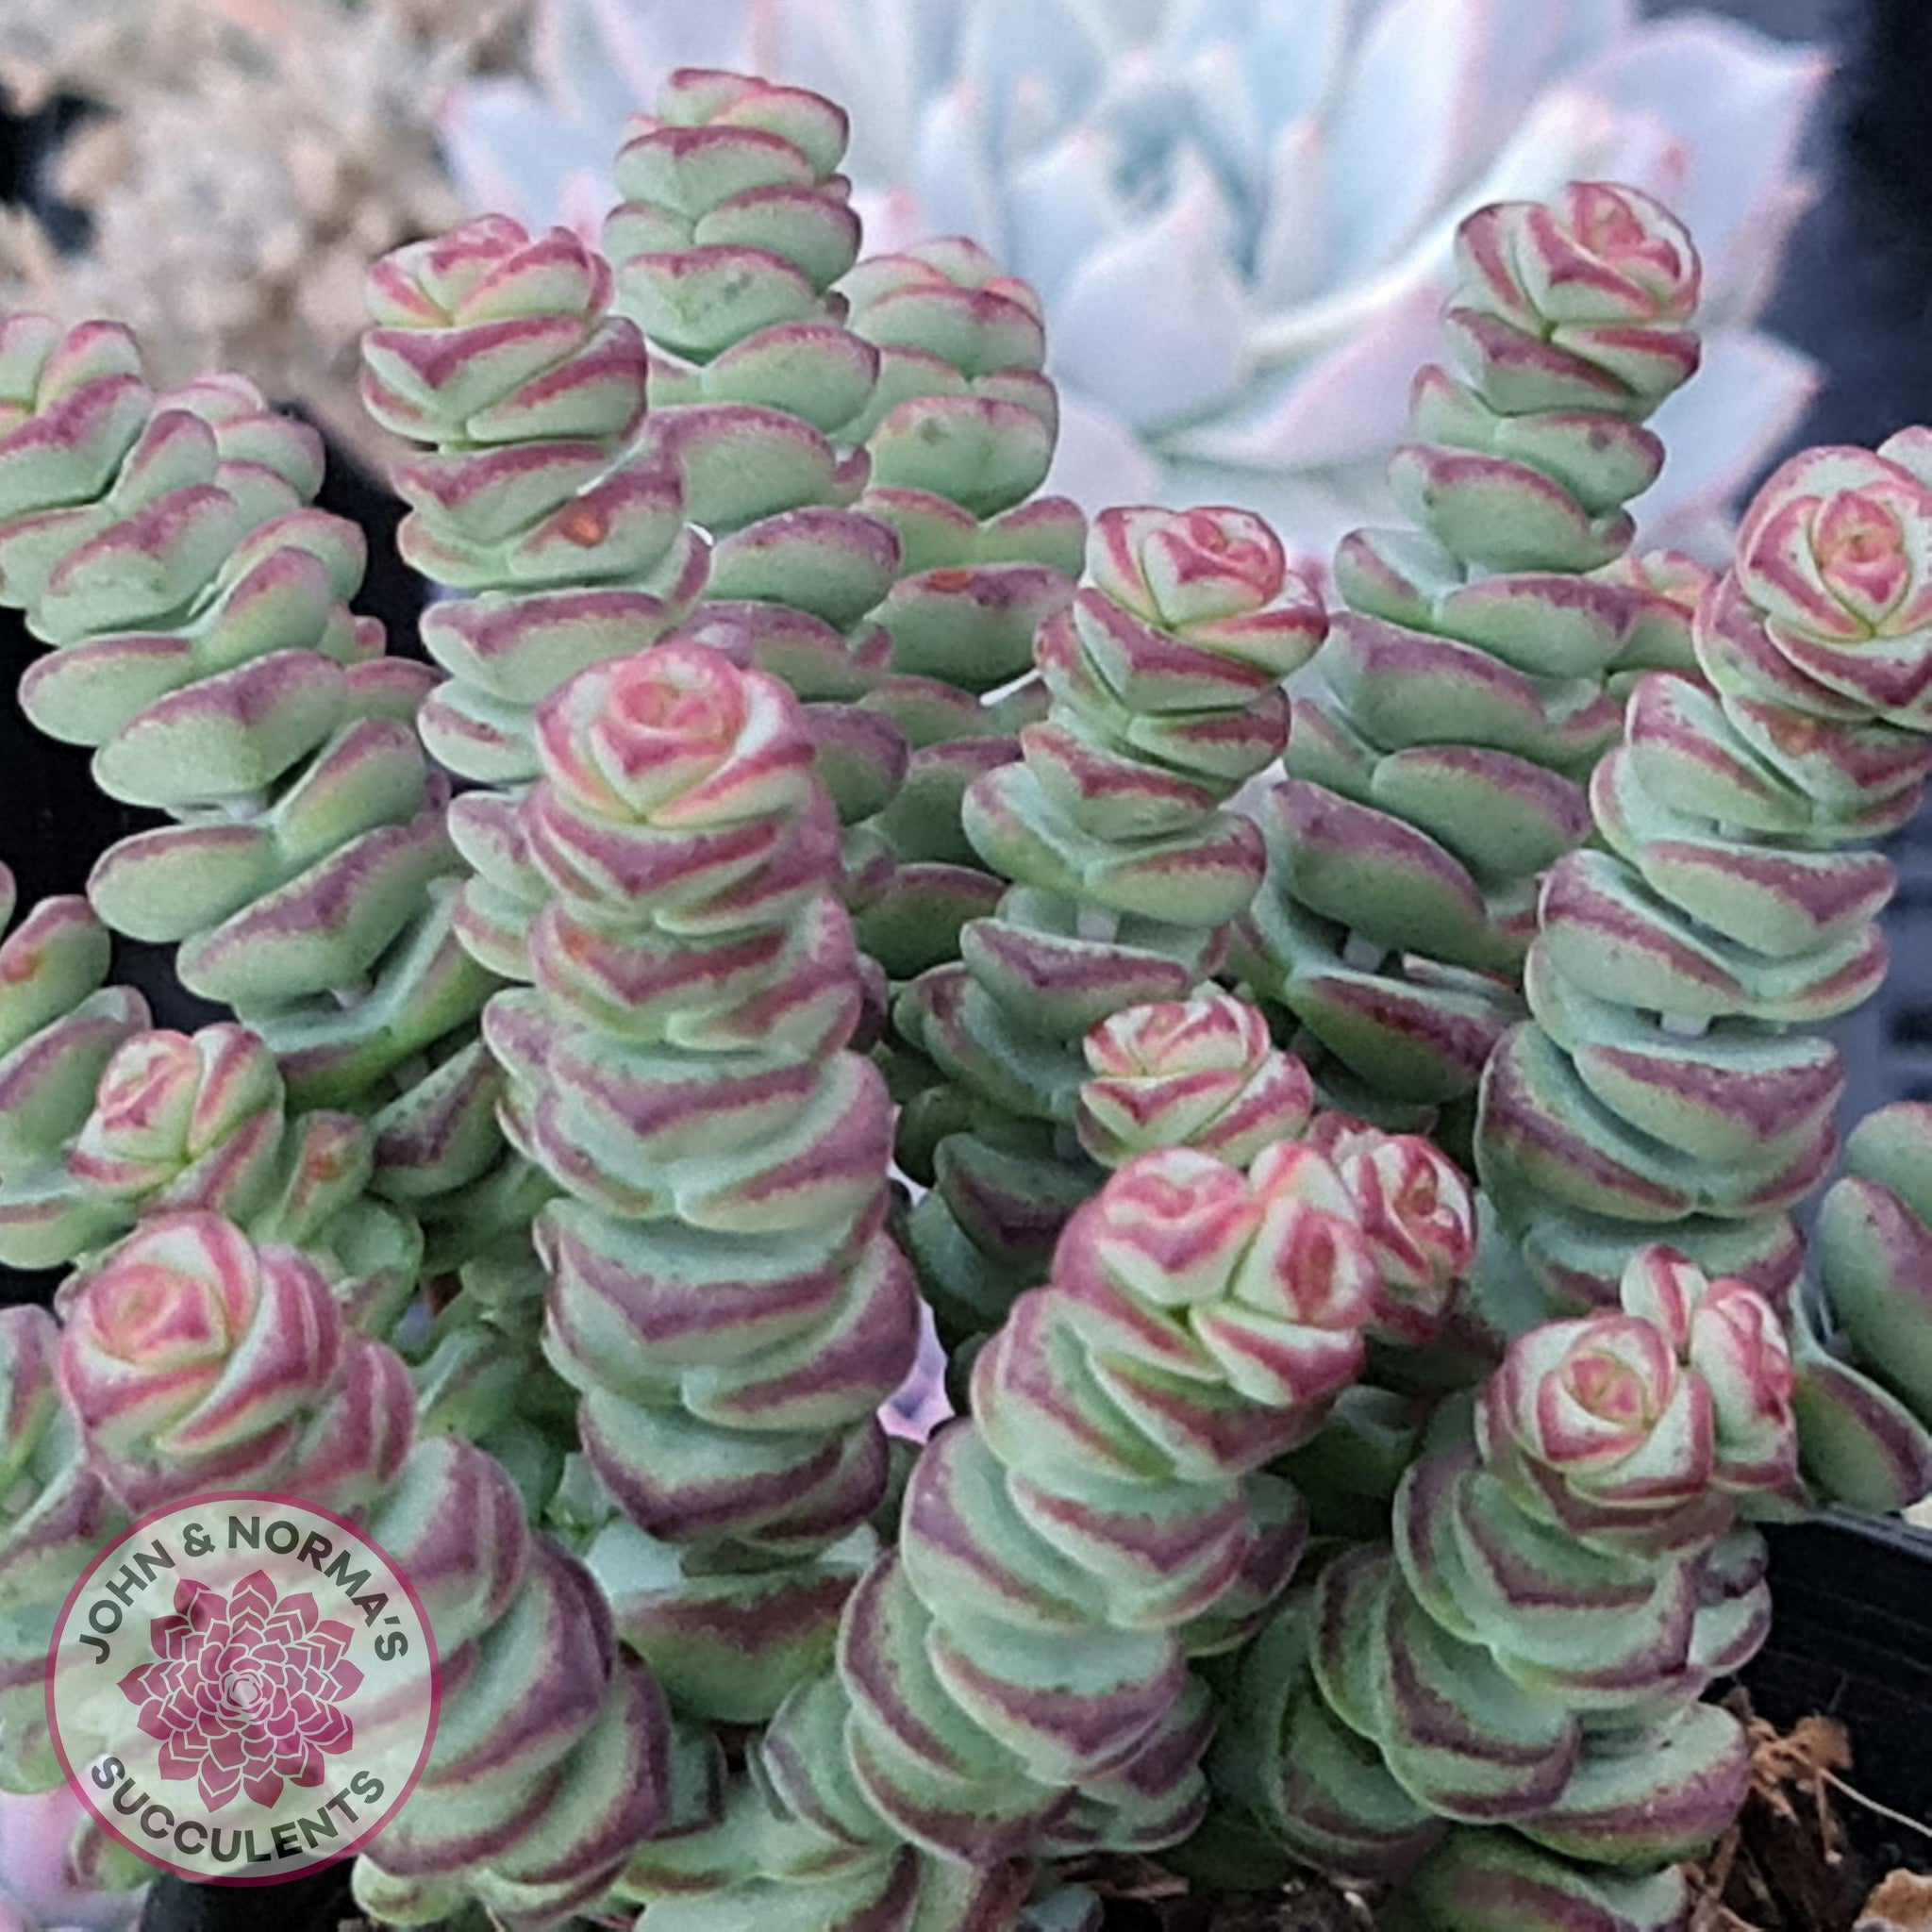 Got this crassula 'baby's necklace' in March 2015 (3 pieces about 2” high)  and here is what it looks like today May 2019 : r/succulents